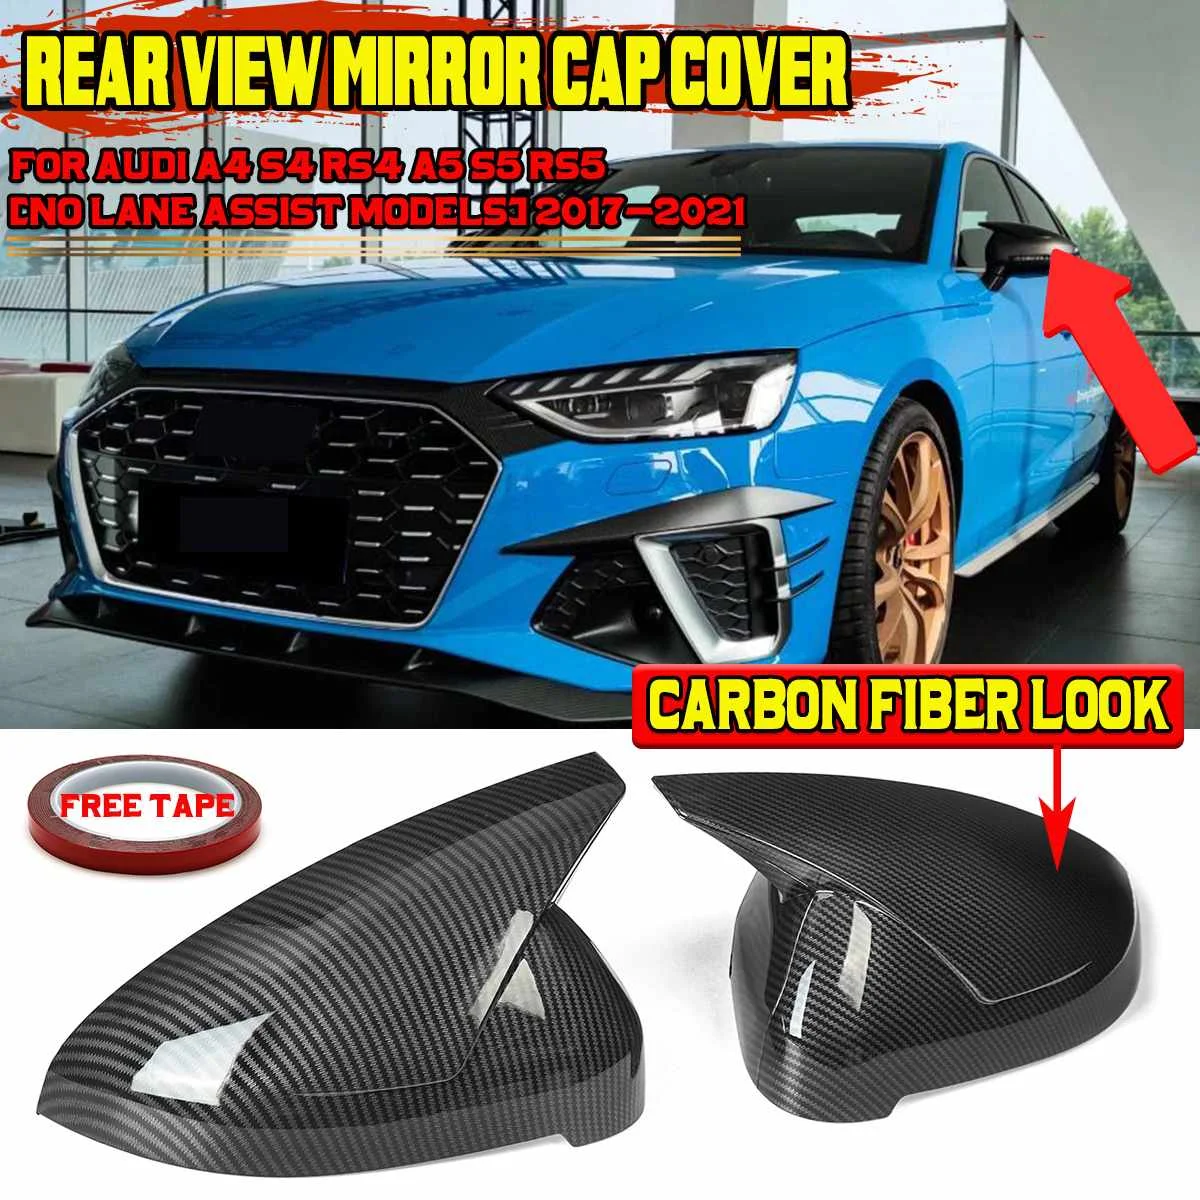 

High Quality Car Side Rearview Mirror Cover Cap ABT-Style For Audi A4 S4 RS4 A5 S5 RS5 2017-2021 Add-on Rear View Mirror Cover